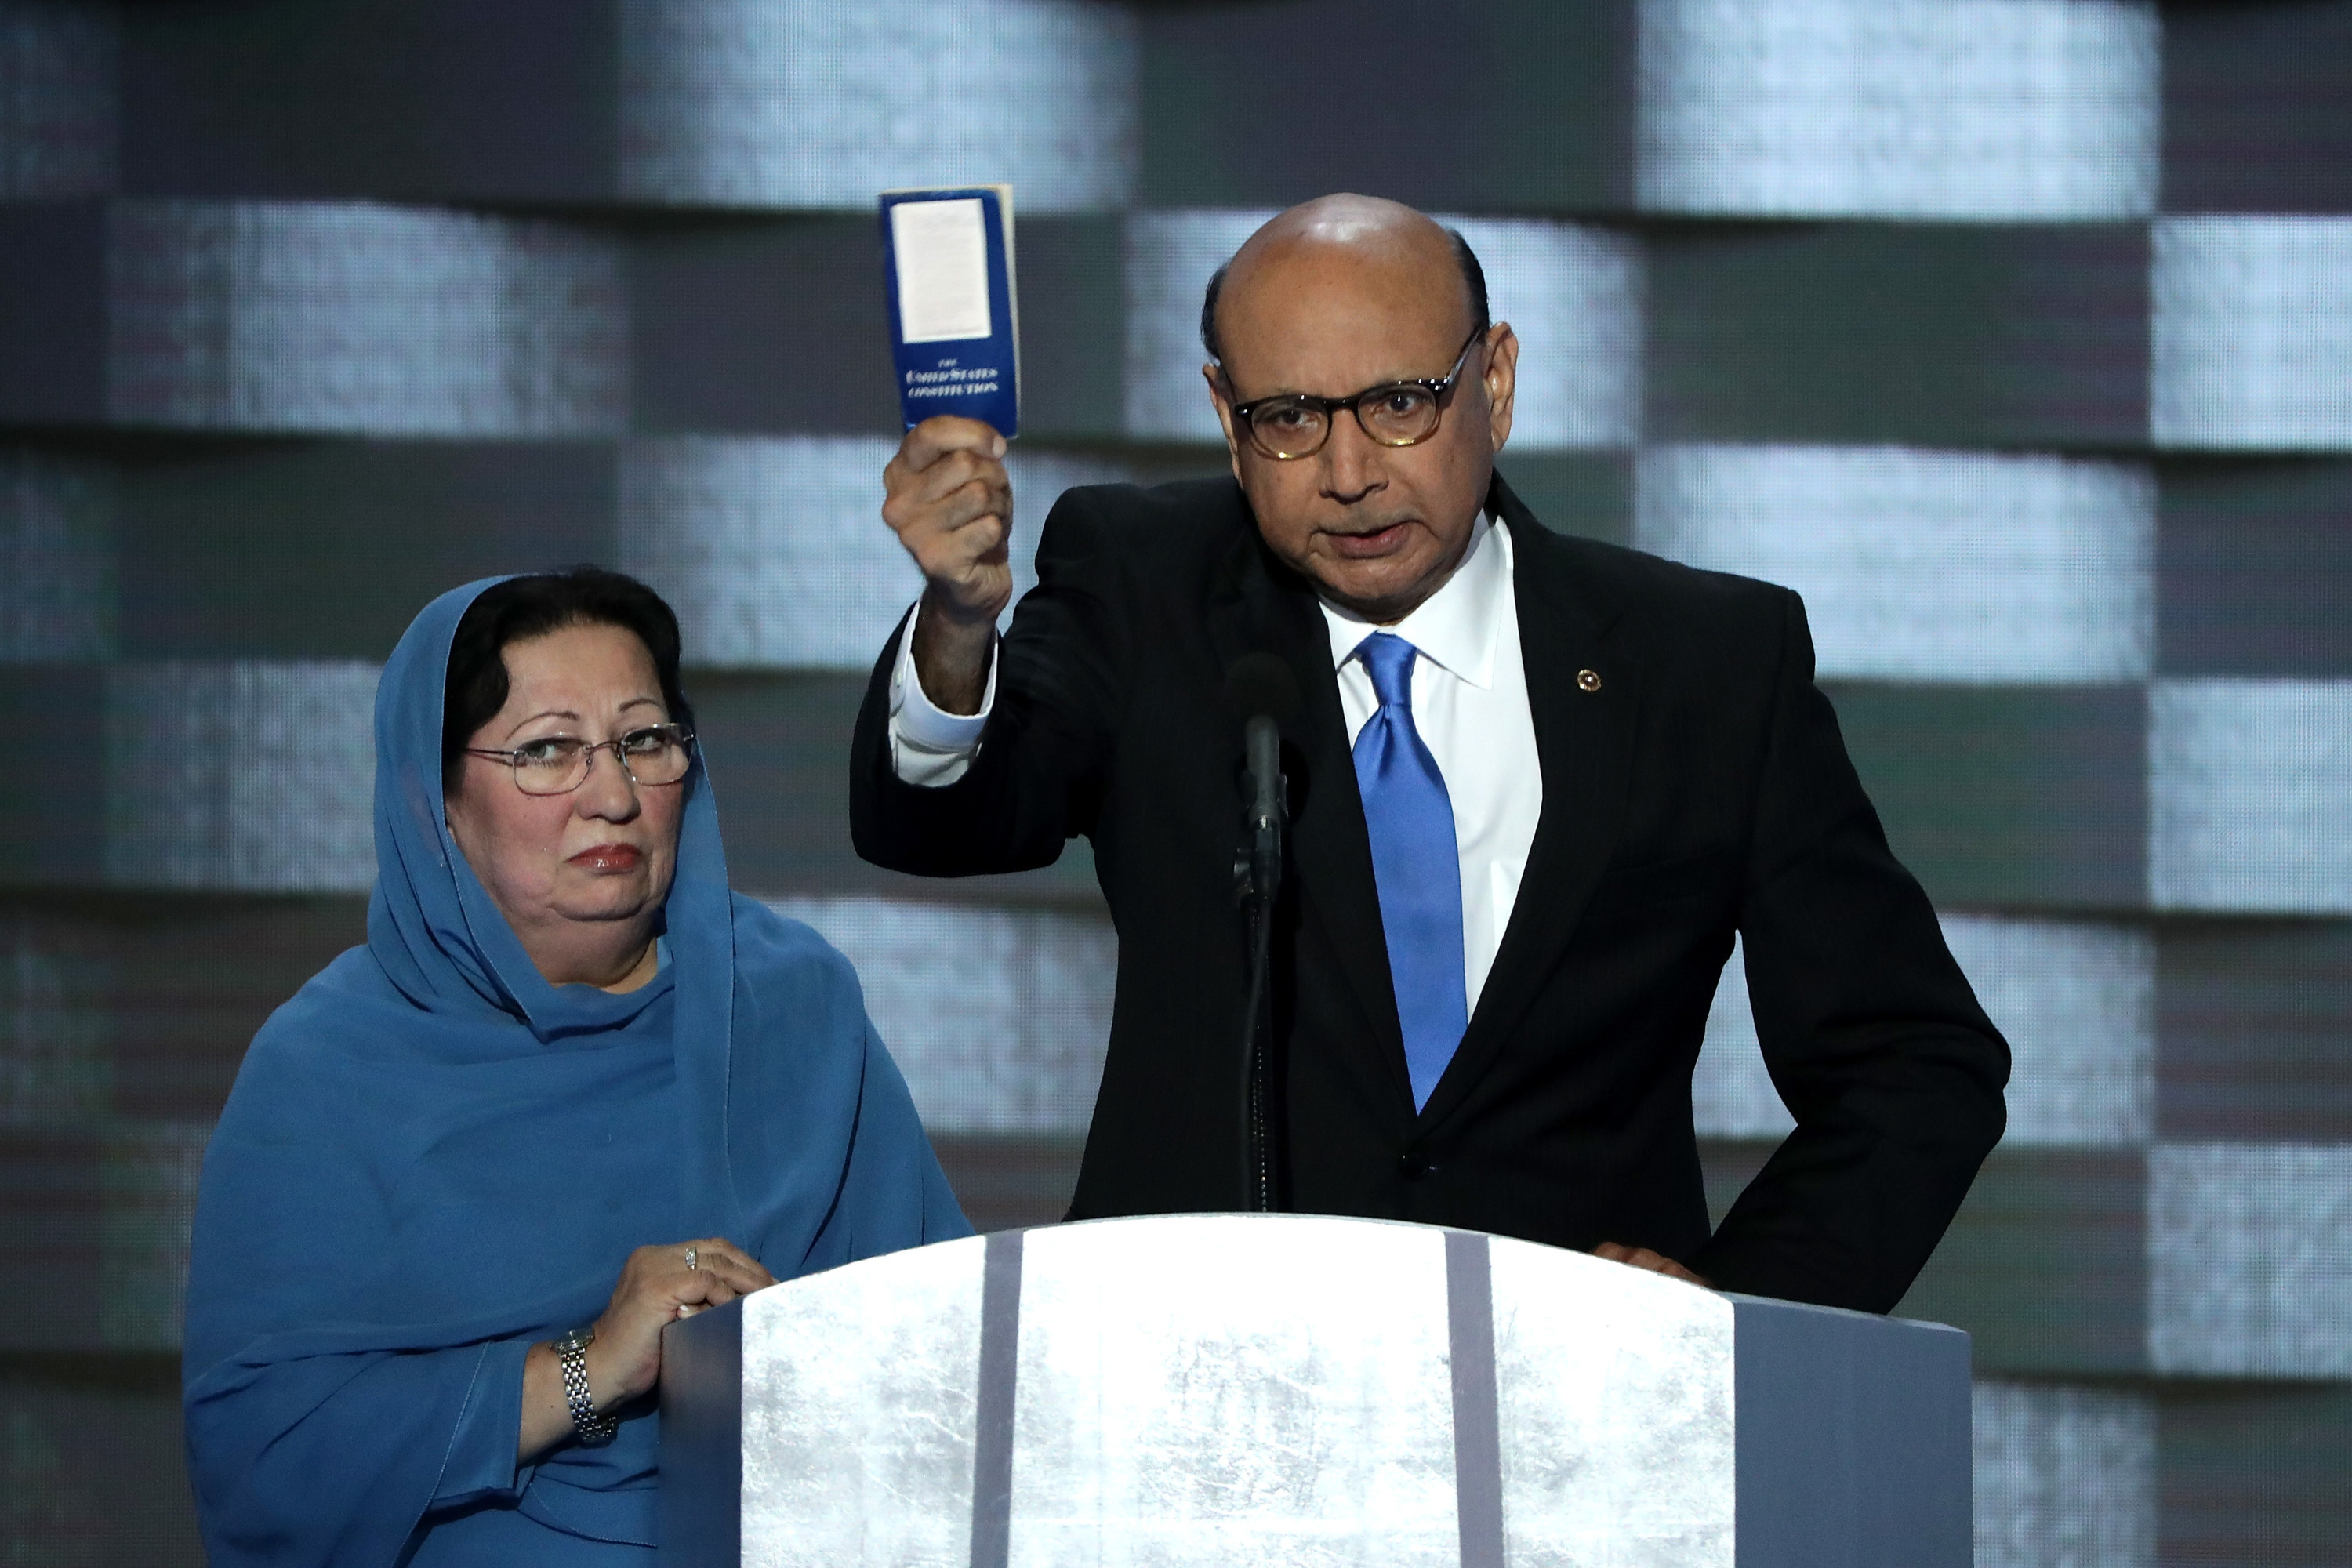 Khizr Khan is shown holding up a copy of the constitution as he gives a speech next to his wife at the 2016 DNC